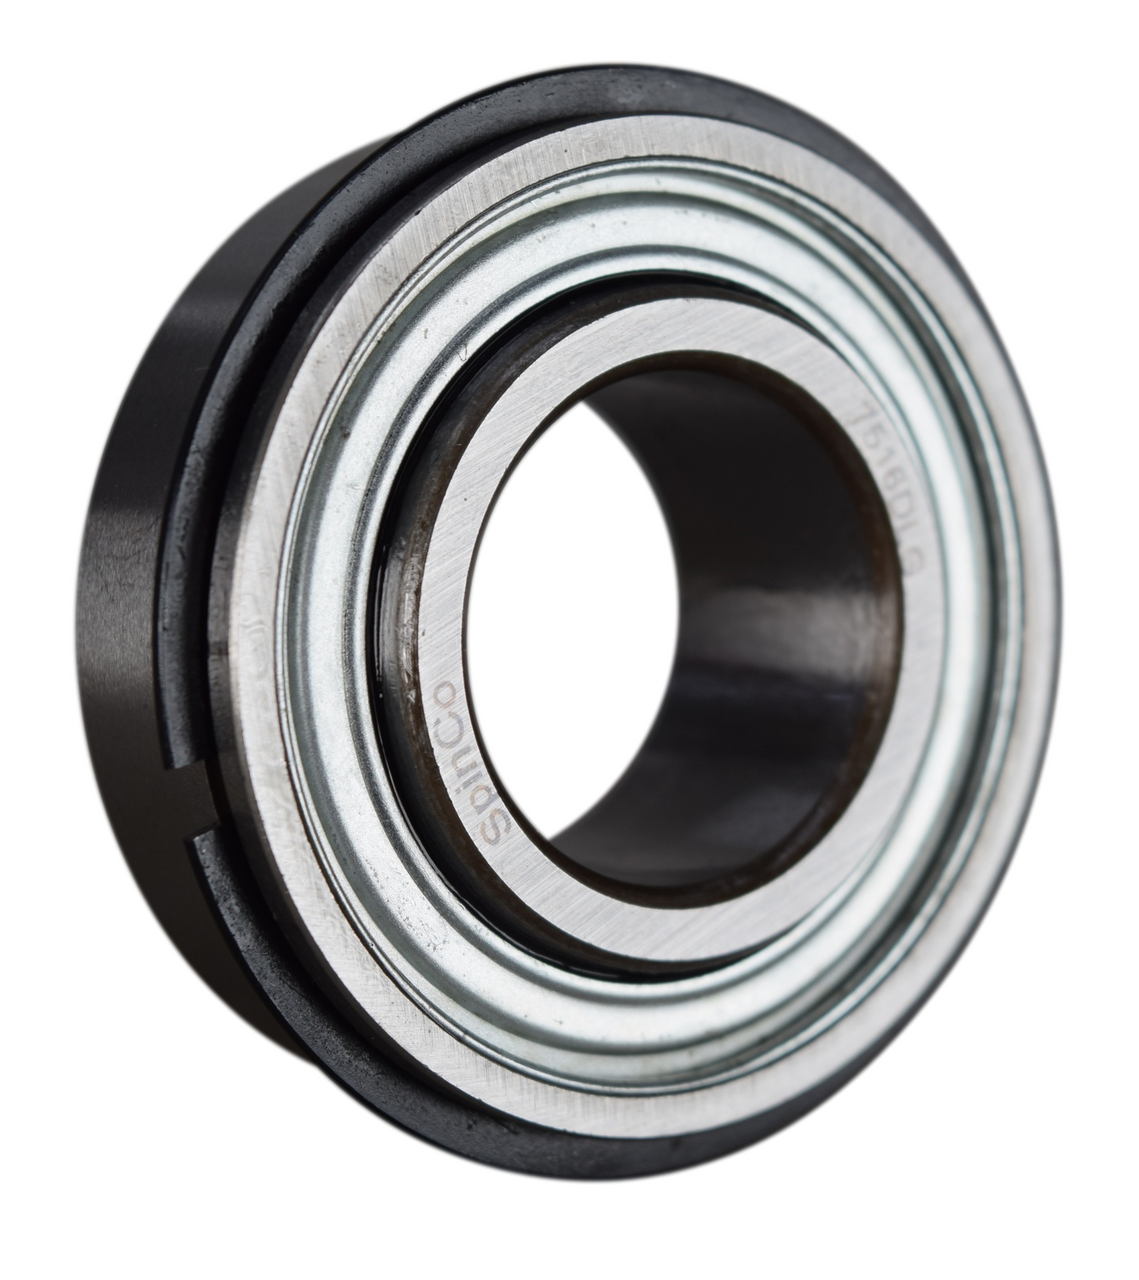 7520DLG GENERIC 1.25x2.5625x.75x.875 Normal duty bearing insert with a parallel outer race with snap ring and groove - Imperial Thumbnail